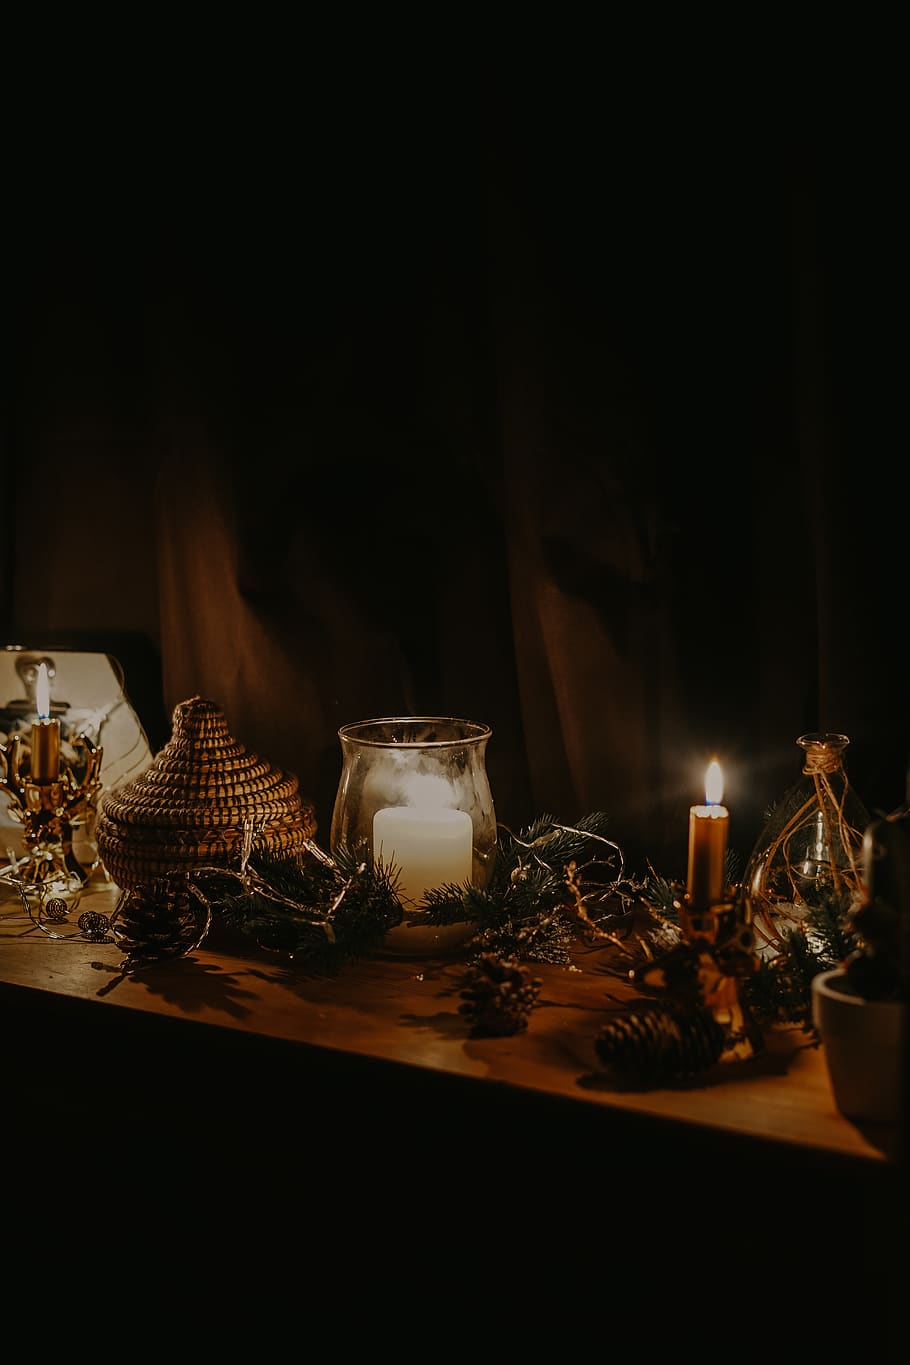 lighted candle near jars and pine cone on table, lighting, building